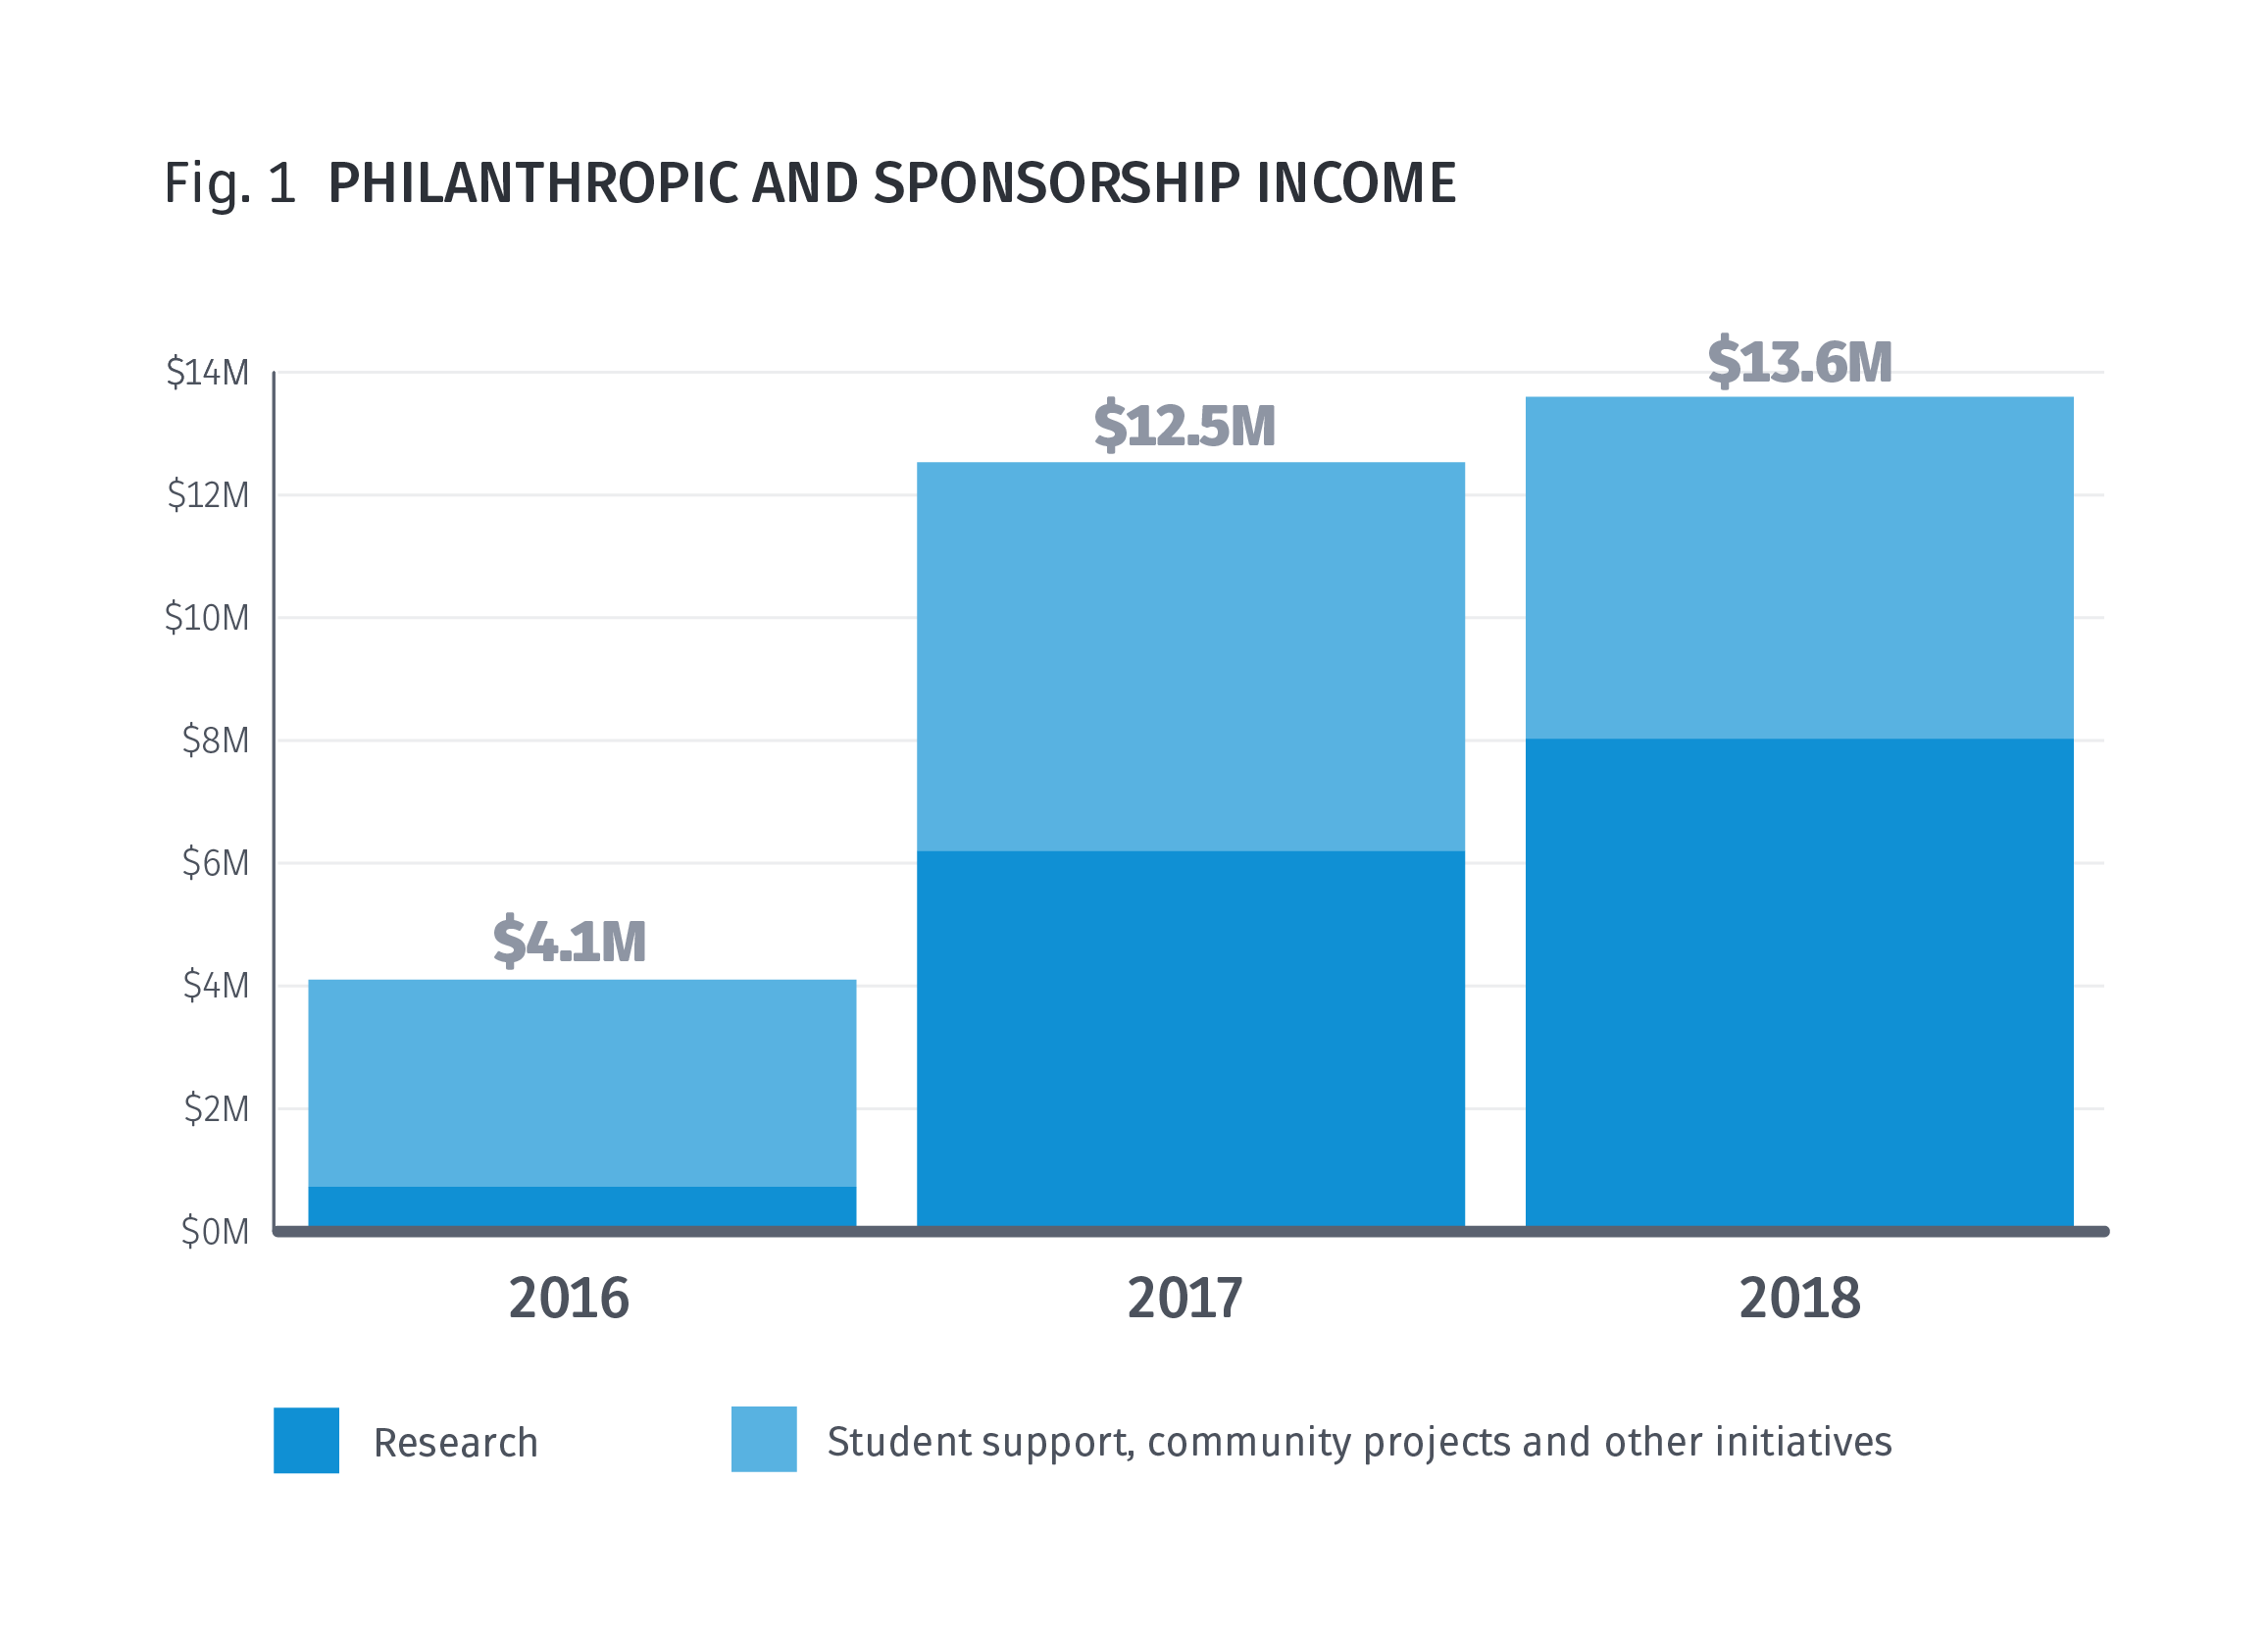 Fig.1 Philanthropic and Sponsorship income - $13.6m in 2018, $12.5m in 2017 and $4.1m in 2016